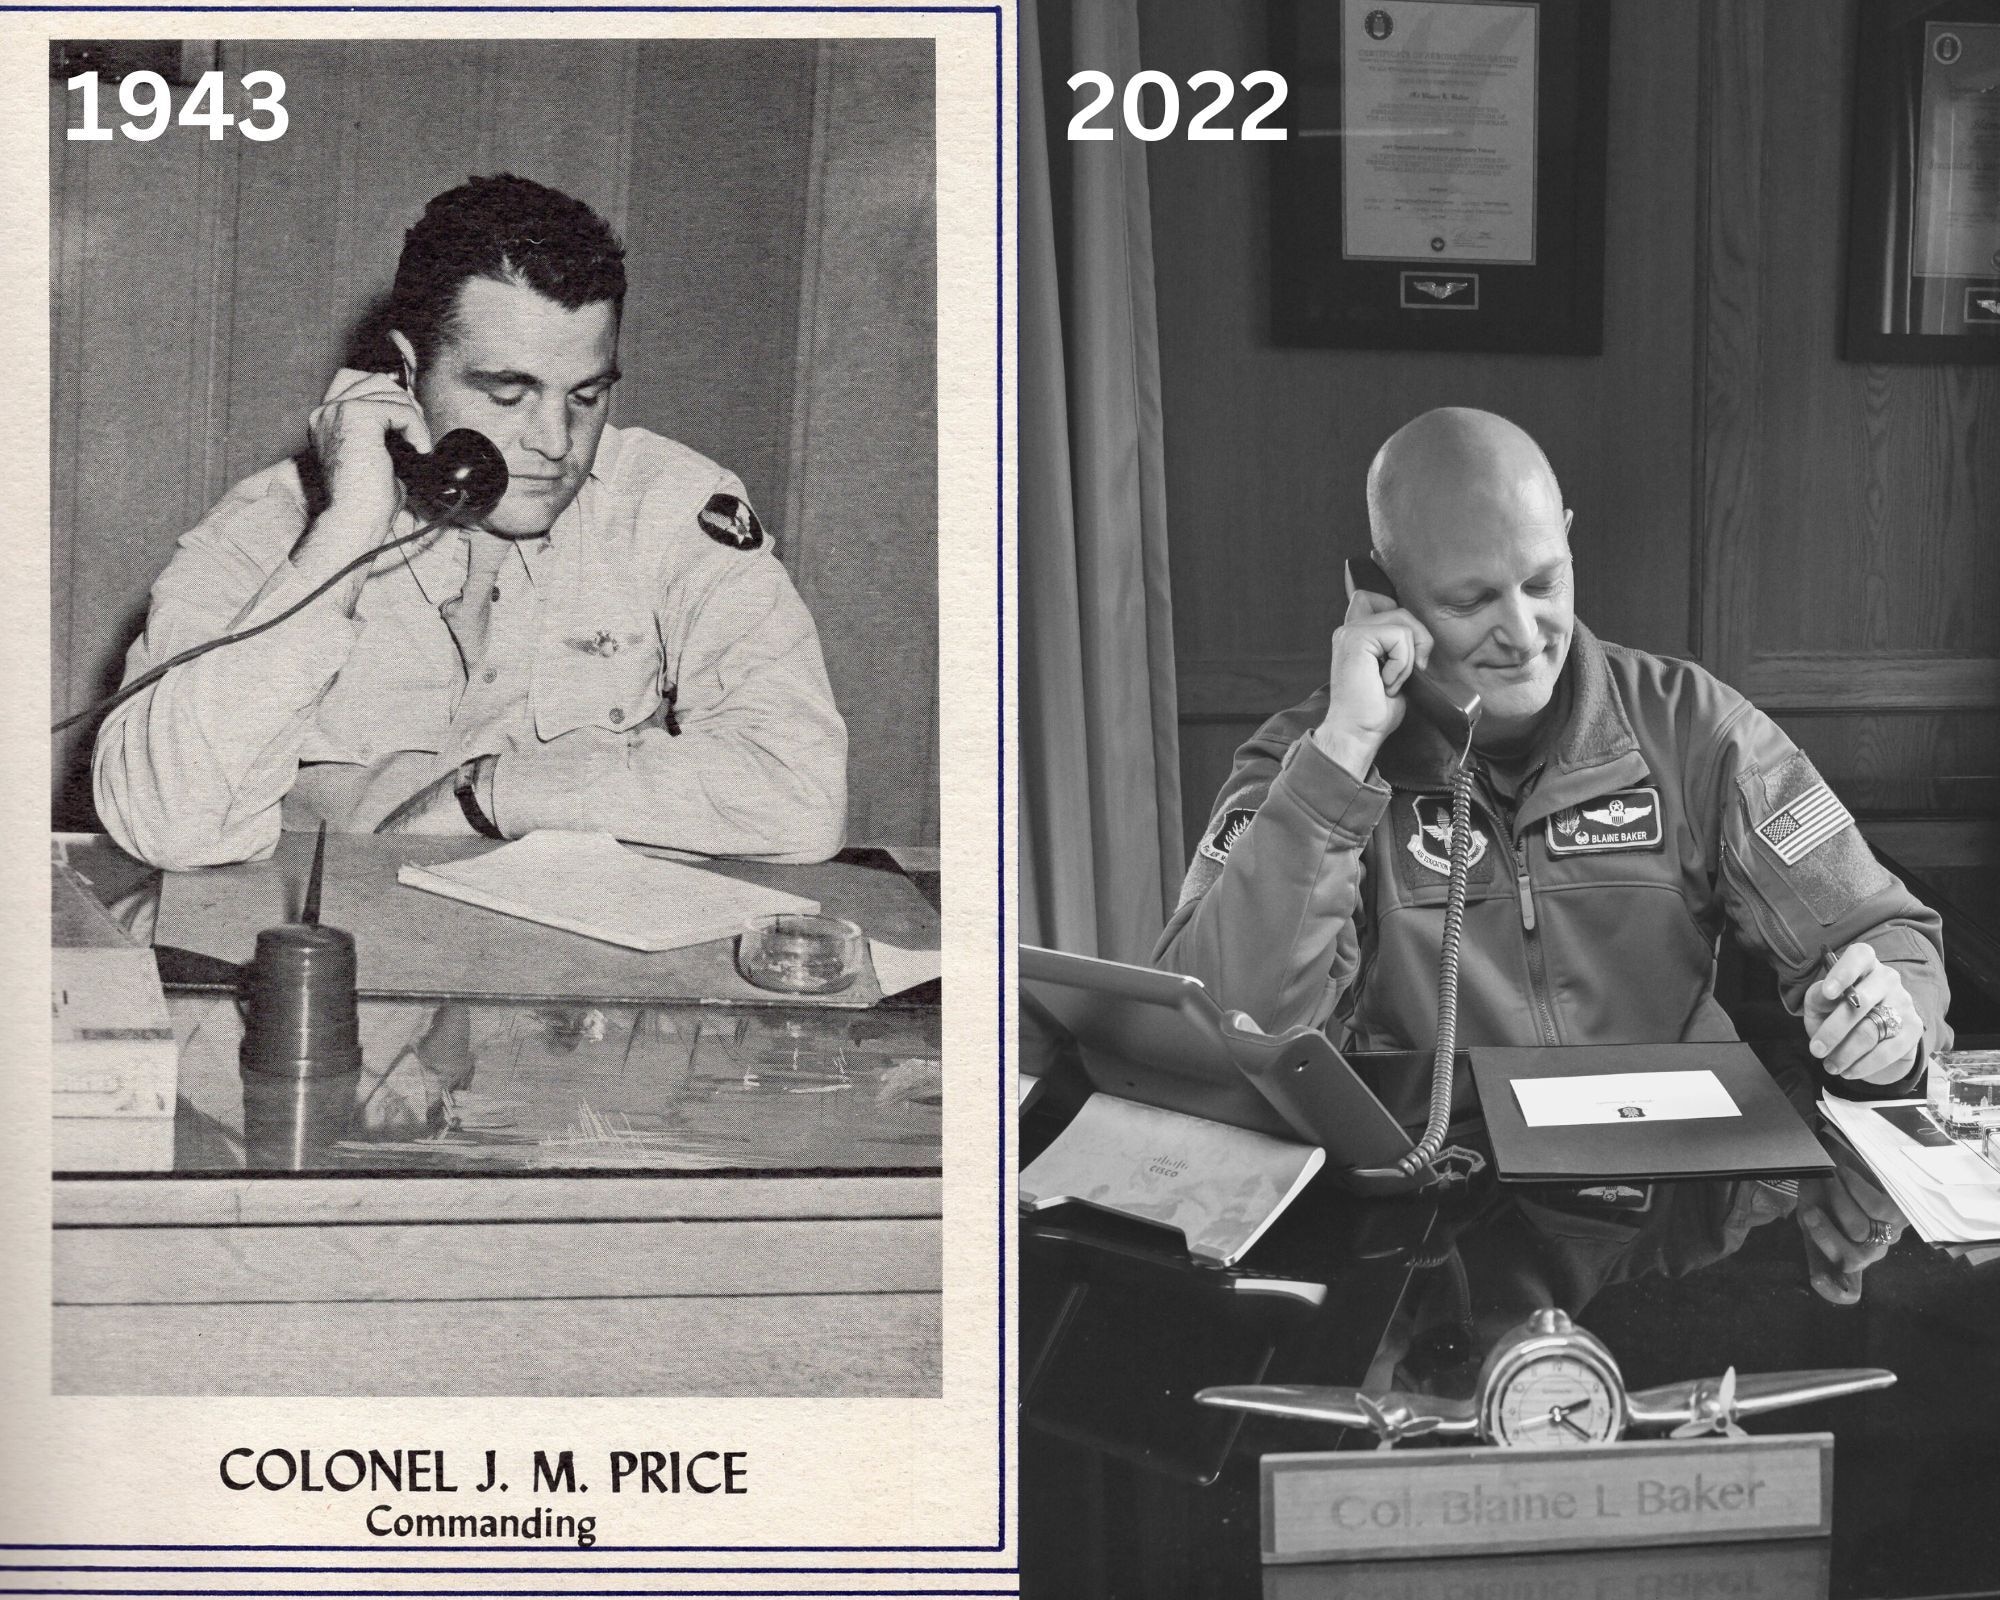 U.S. Air Force Col. John M. Price (left), commanding officer of Altus Army Airfield, and Col. Blaine Baker, 97th Air Mobility Wing commander, talk on phones in their offices at Altus Air Force Base (AAFB), Oklahoma, 79 years apart. Throughout its 80 years, AAFB Airmen have welcomed 45 installation commanders, operated 23 different airframes, and aligned under six different major commands. (U.S. Air Force illustration by Senior Airman Trenton Jancze)